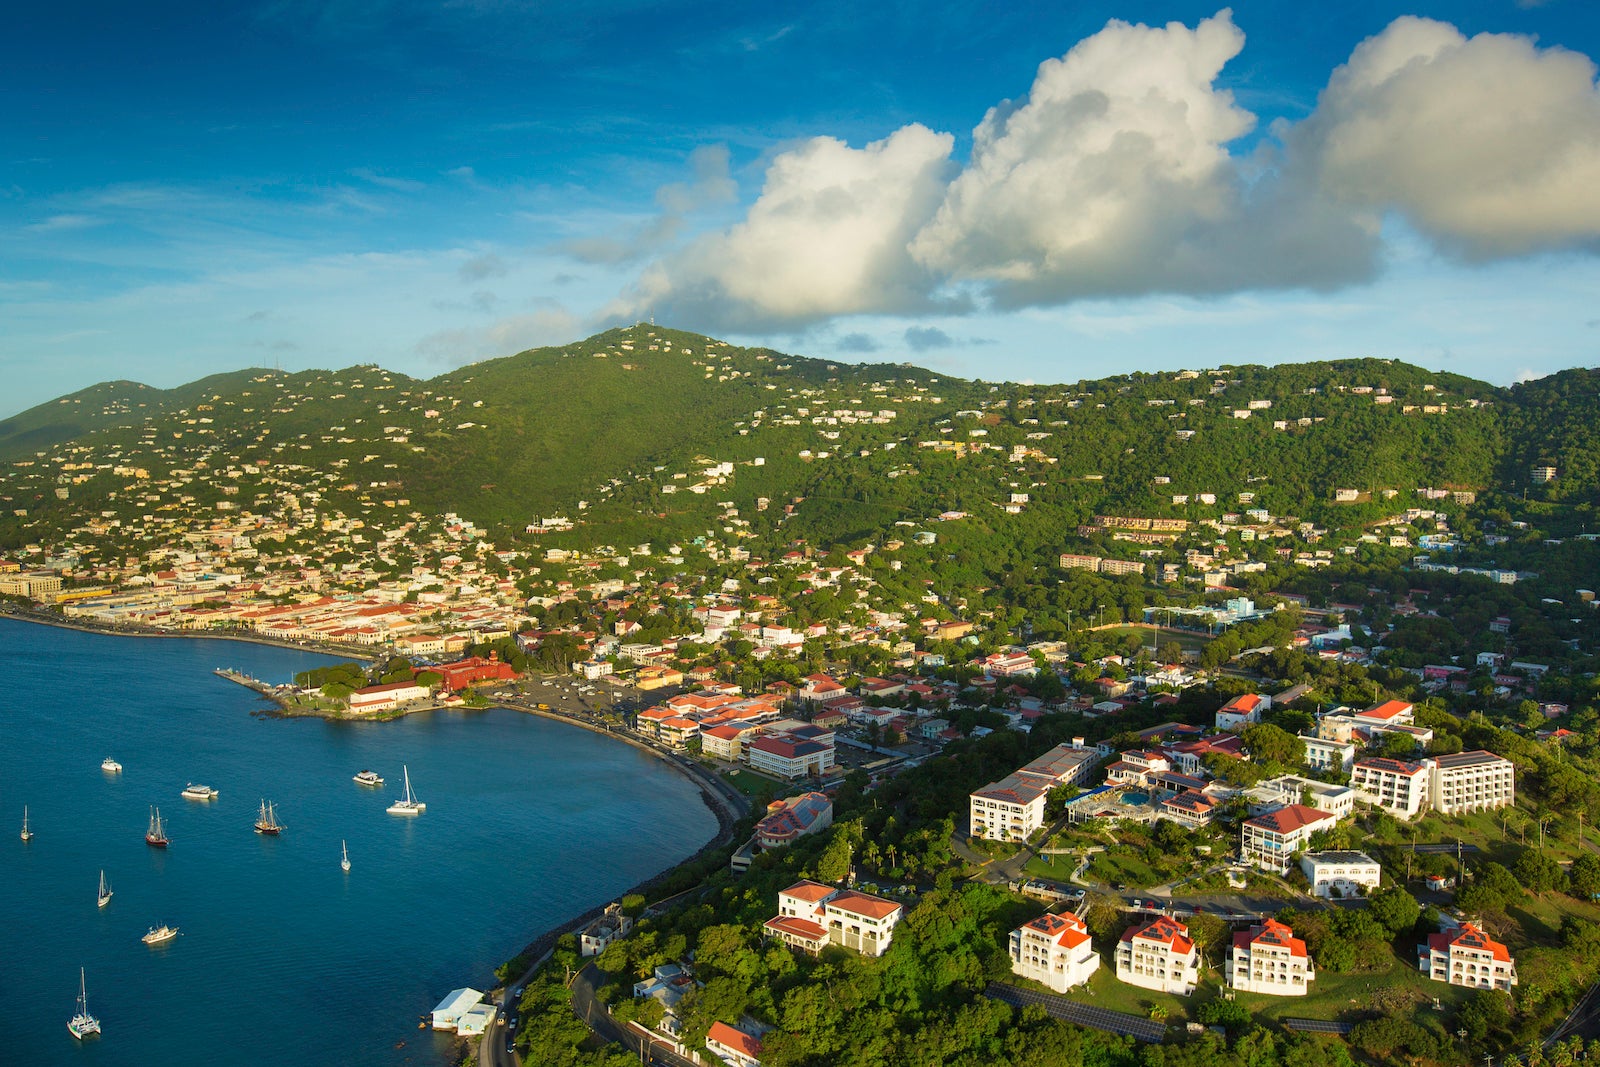 Fly to St. Thomas from multiple US cities for as low as $275